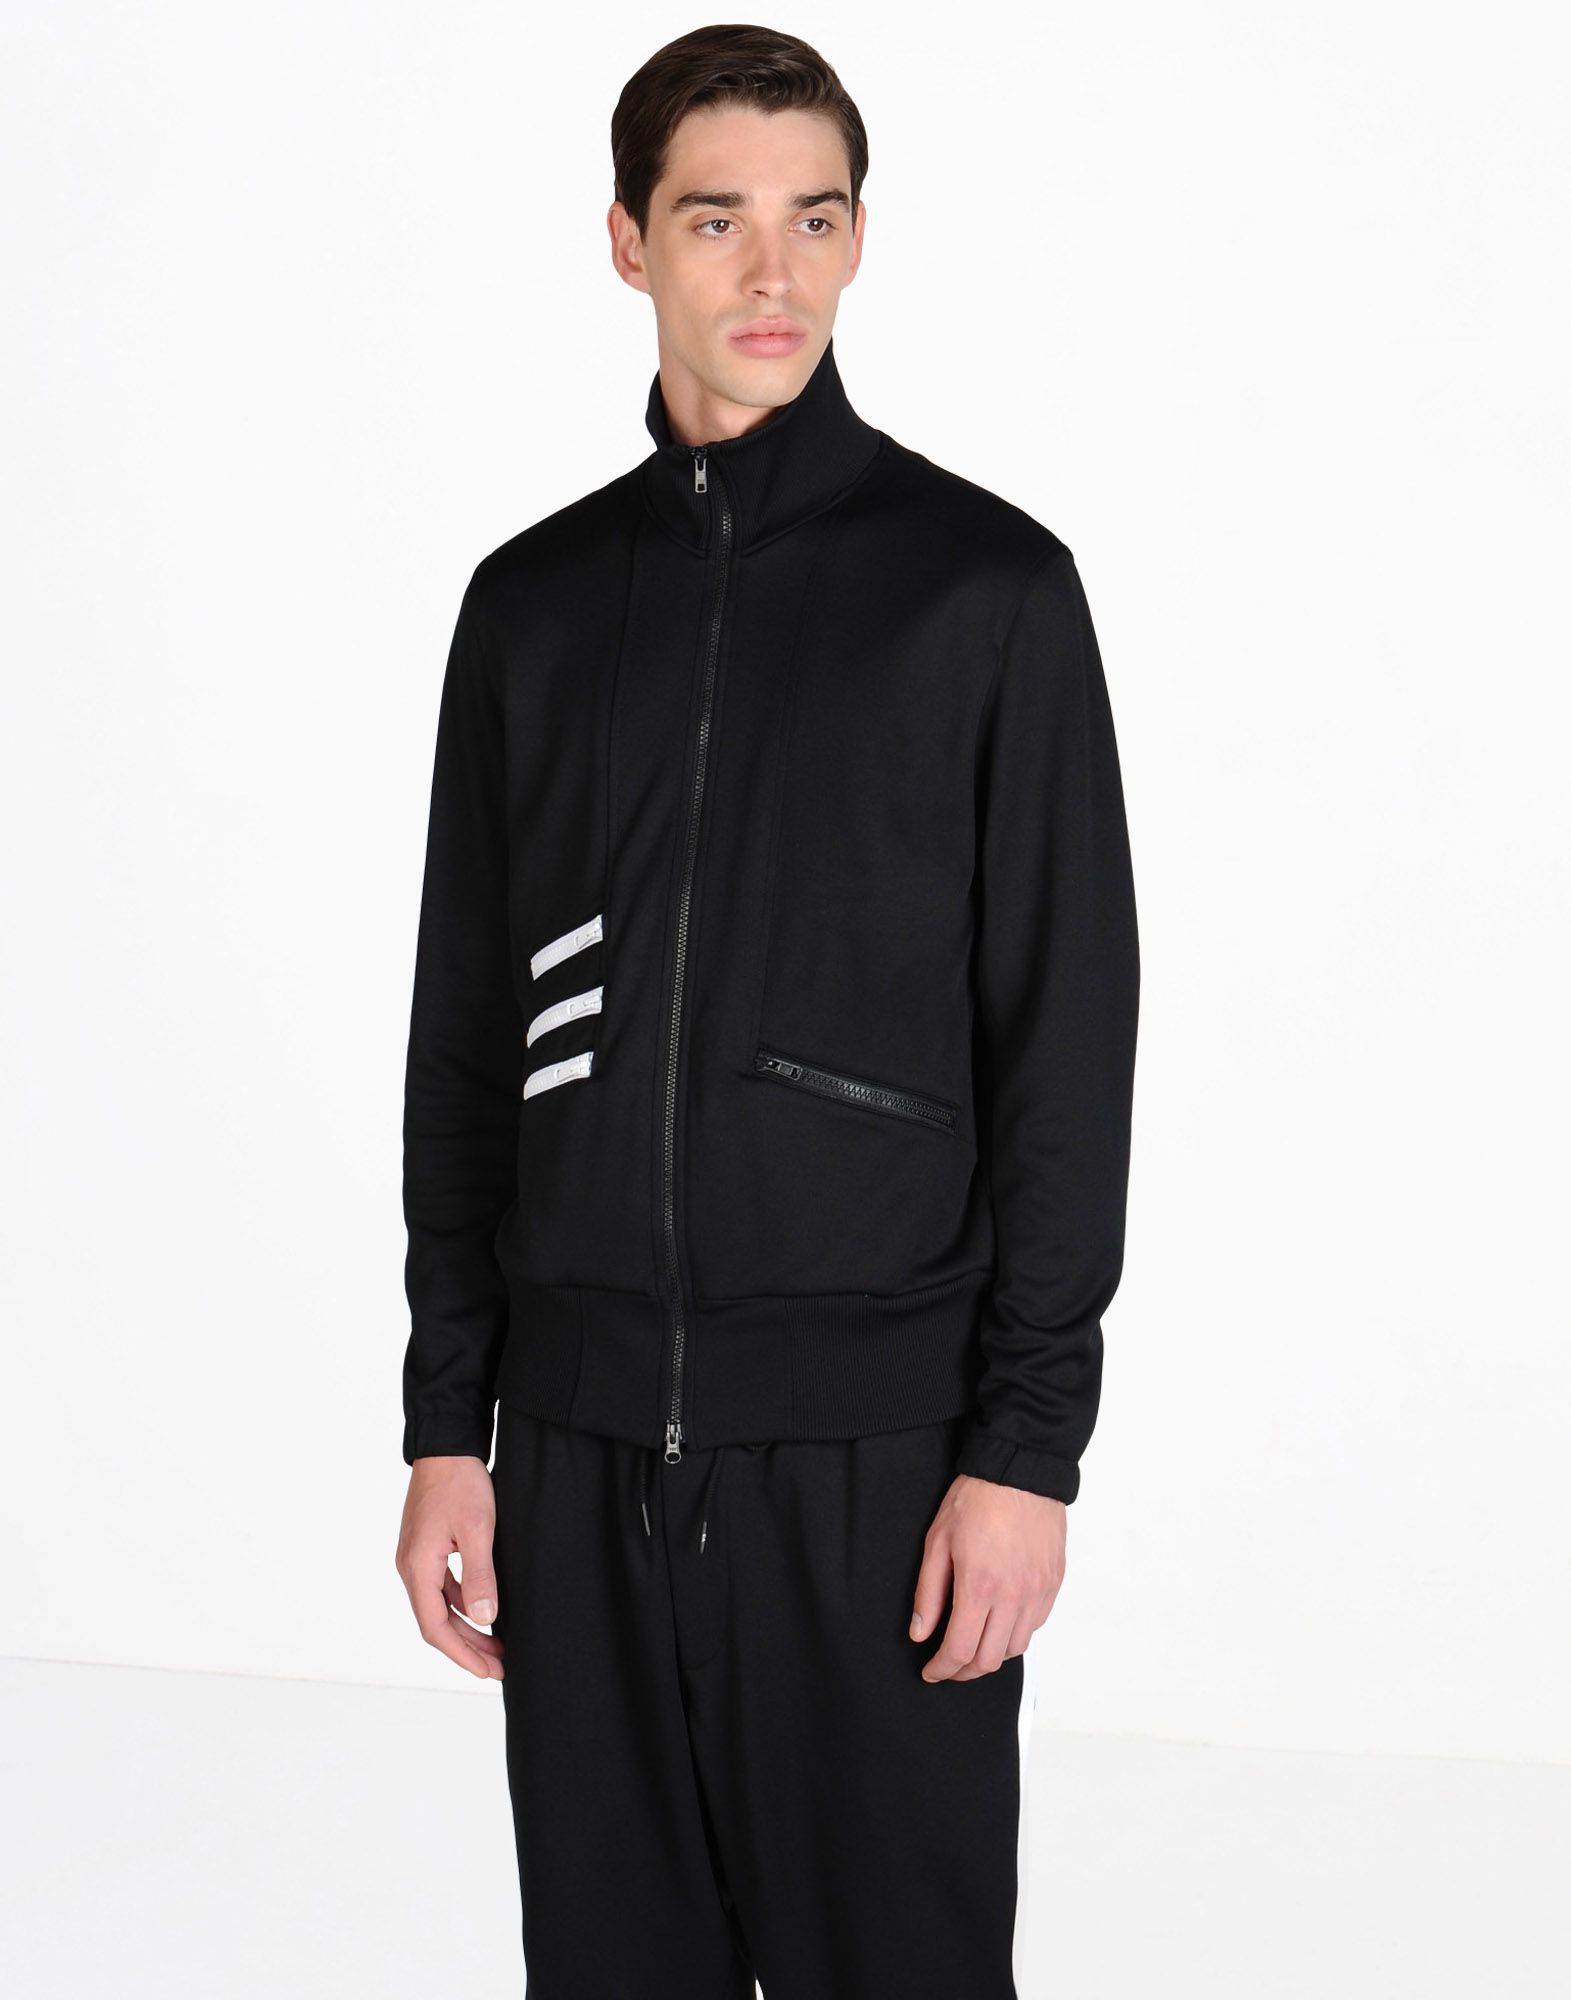 Y 3 3 STRIPES TRACK JKT for Men | Adidas Y-3 Official Store